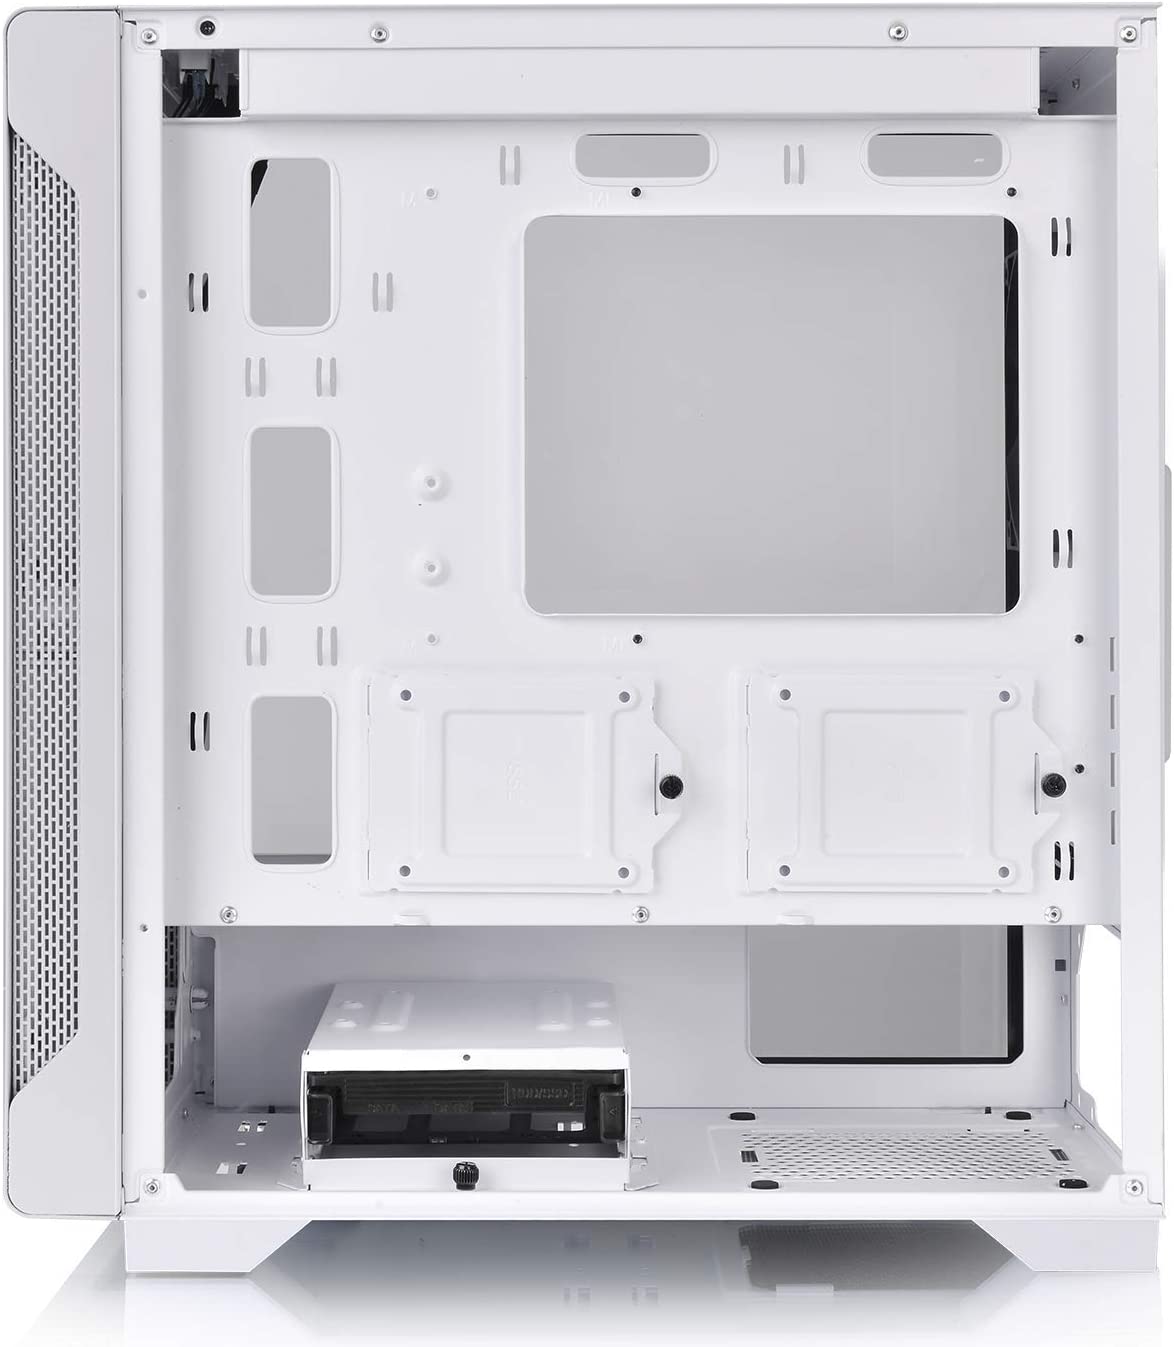 Thermaltake S100 Tempered Glass Snow Edition Micro-ATX mini-Tower Computer Case with 120mm Rear Fan Pre-Installed CA-1Q9-00S6WN-00, White S100 White